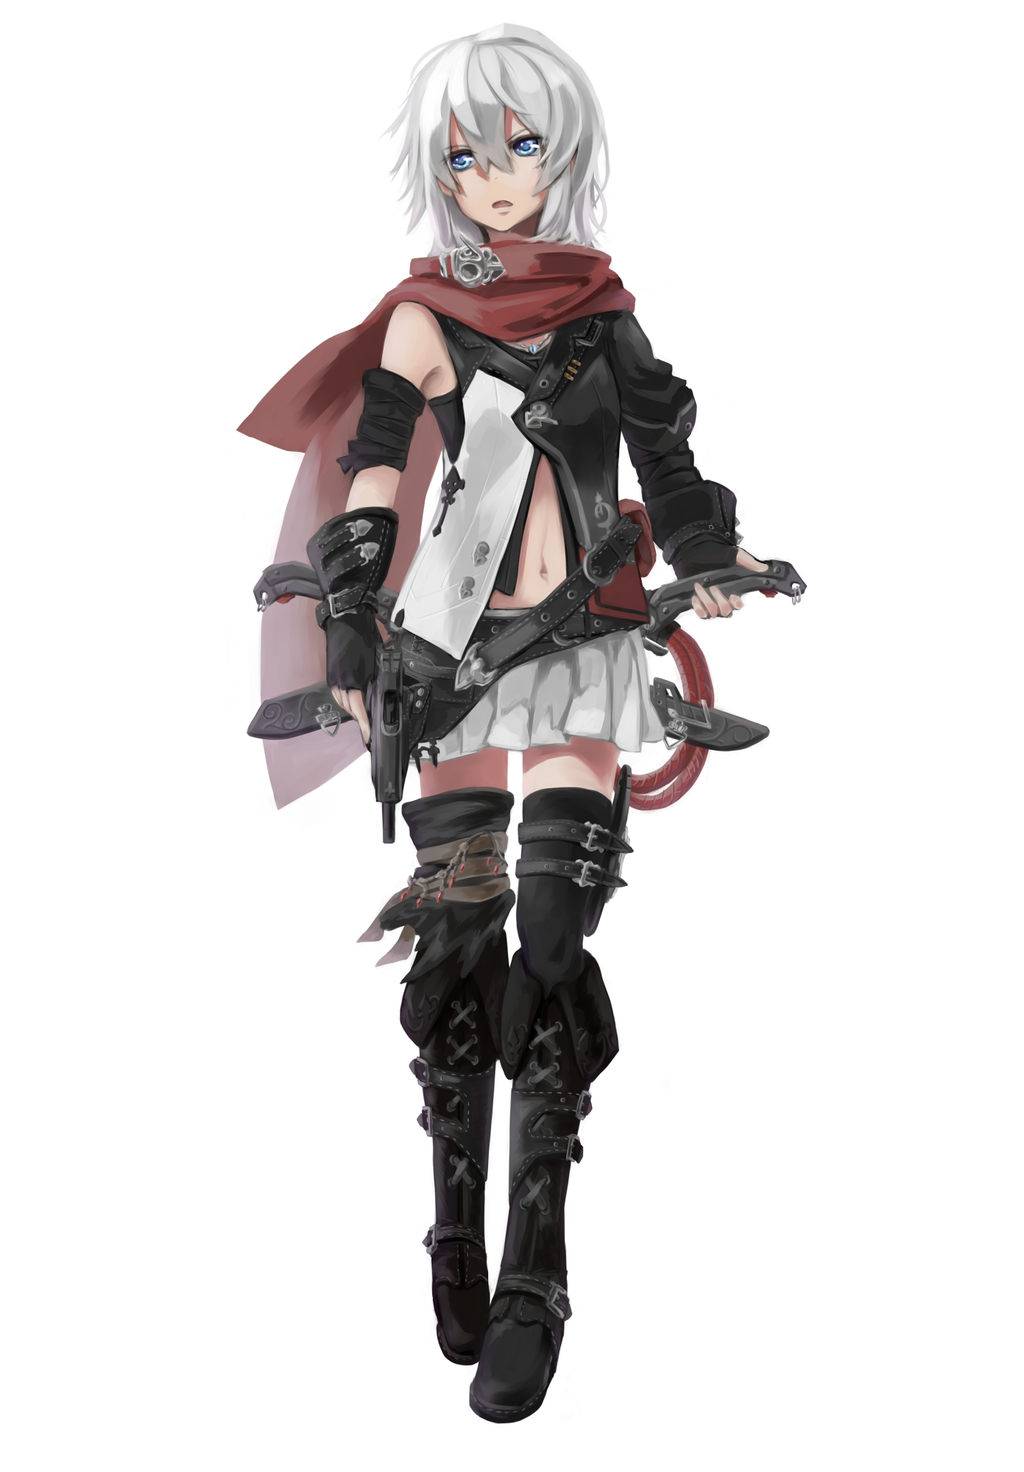 Anime girl assassin outfit